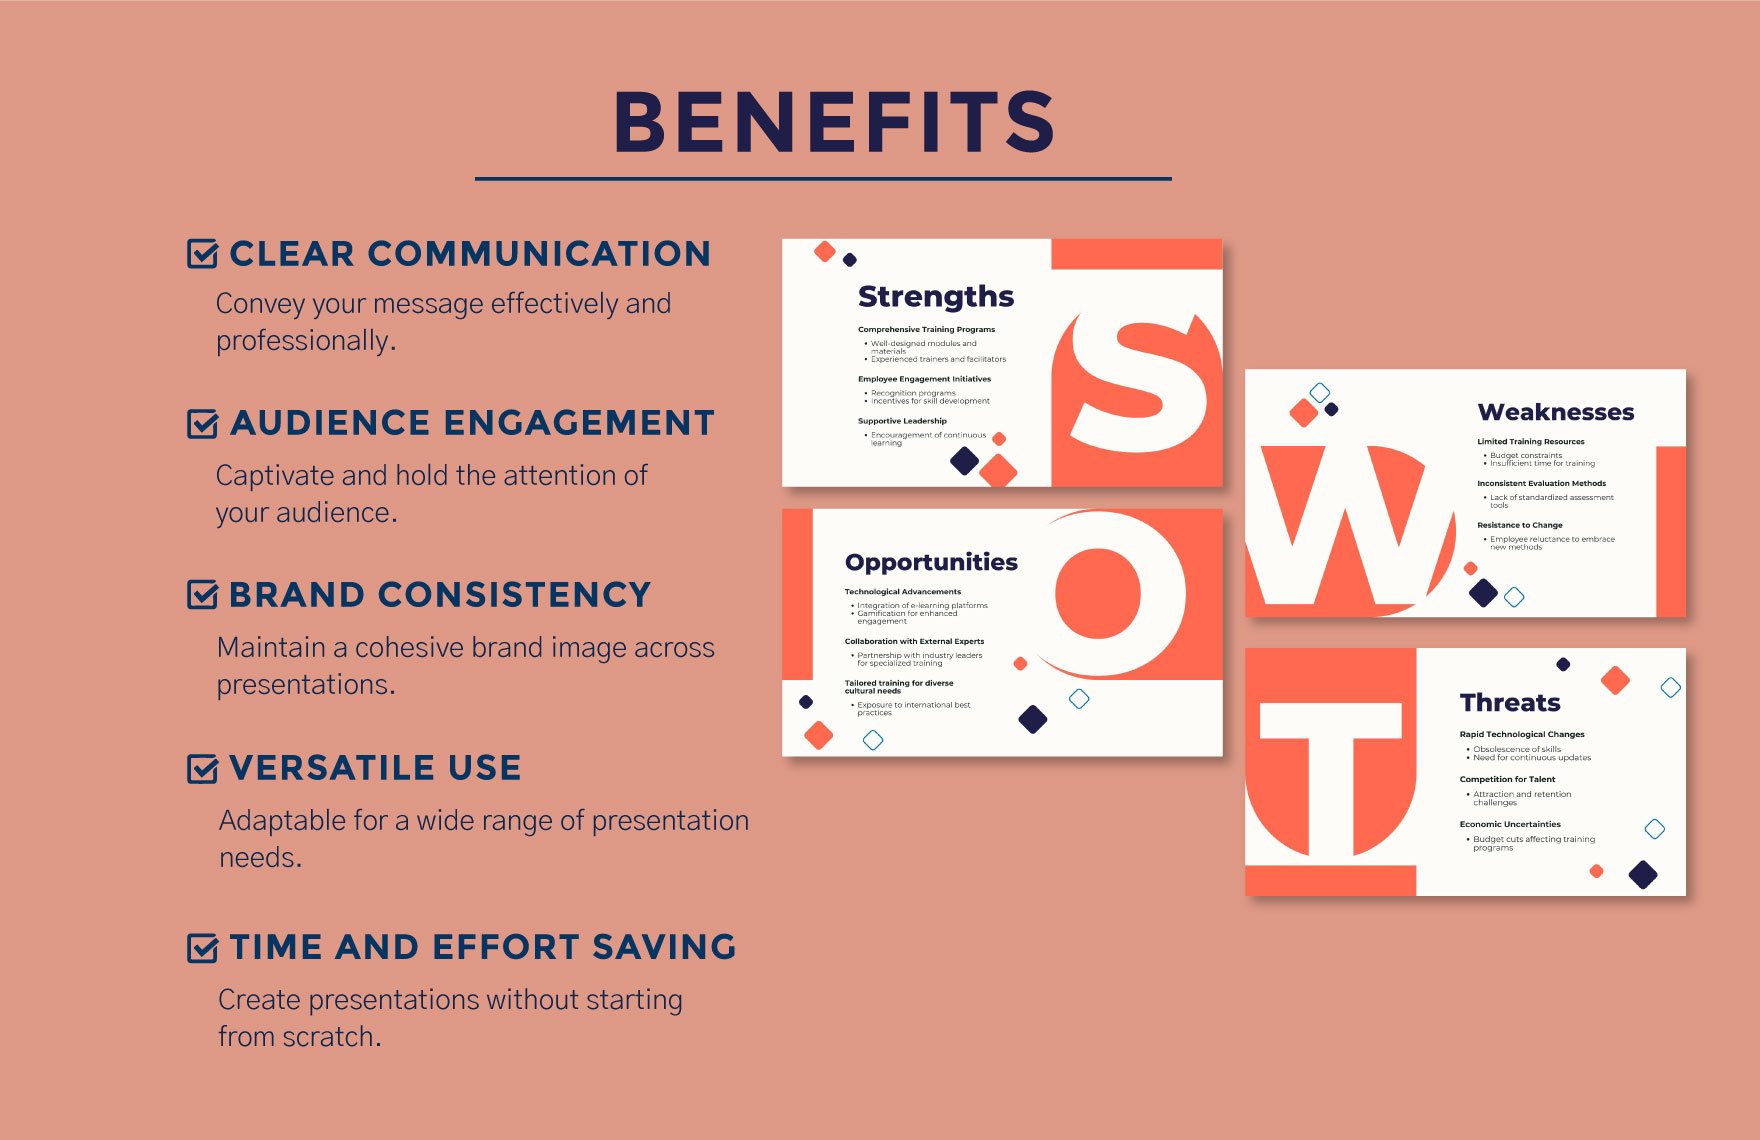 SWOT Analysis for Training and Development Template